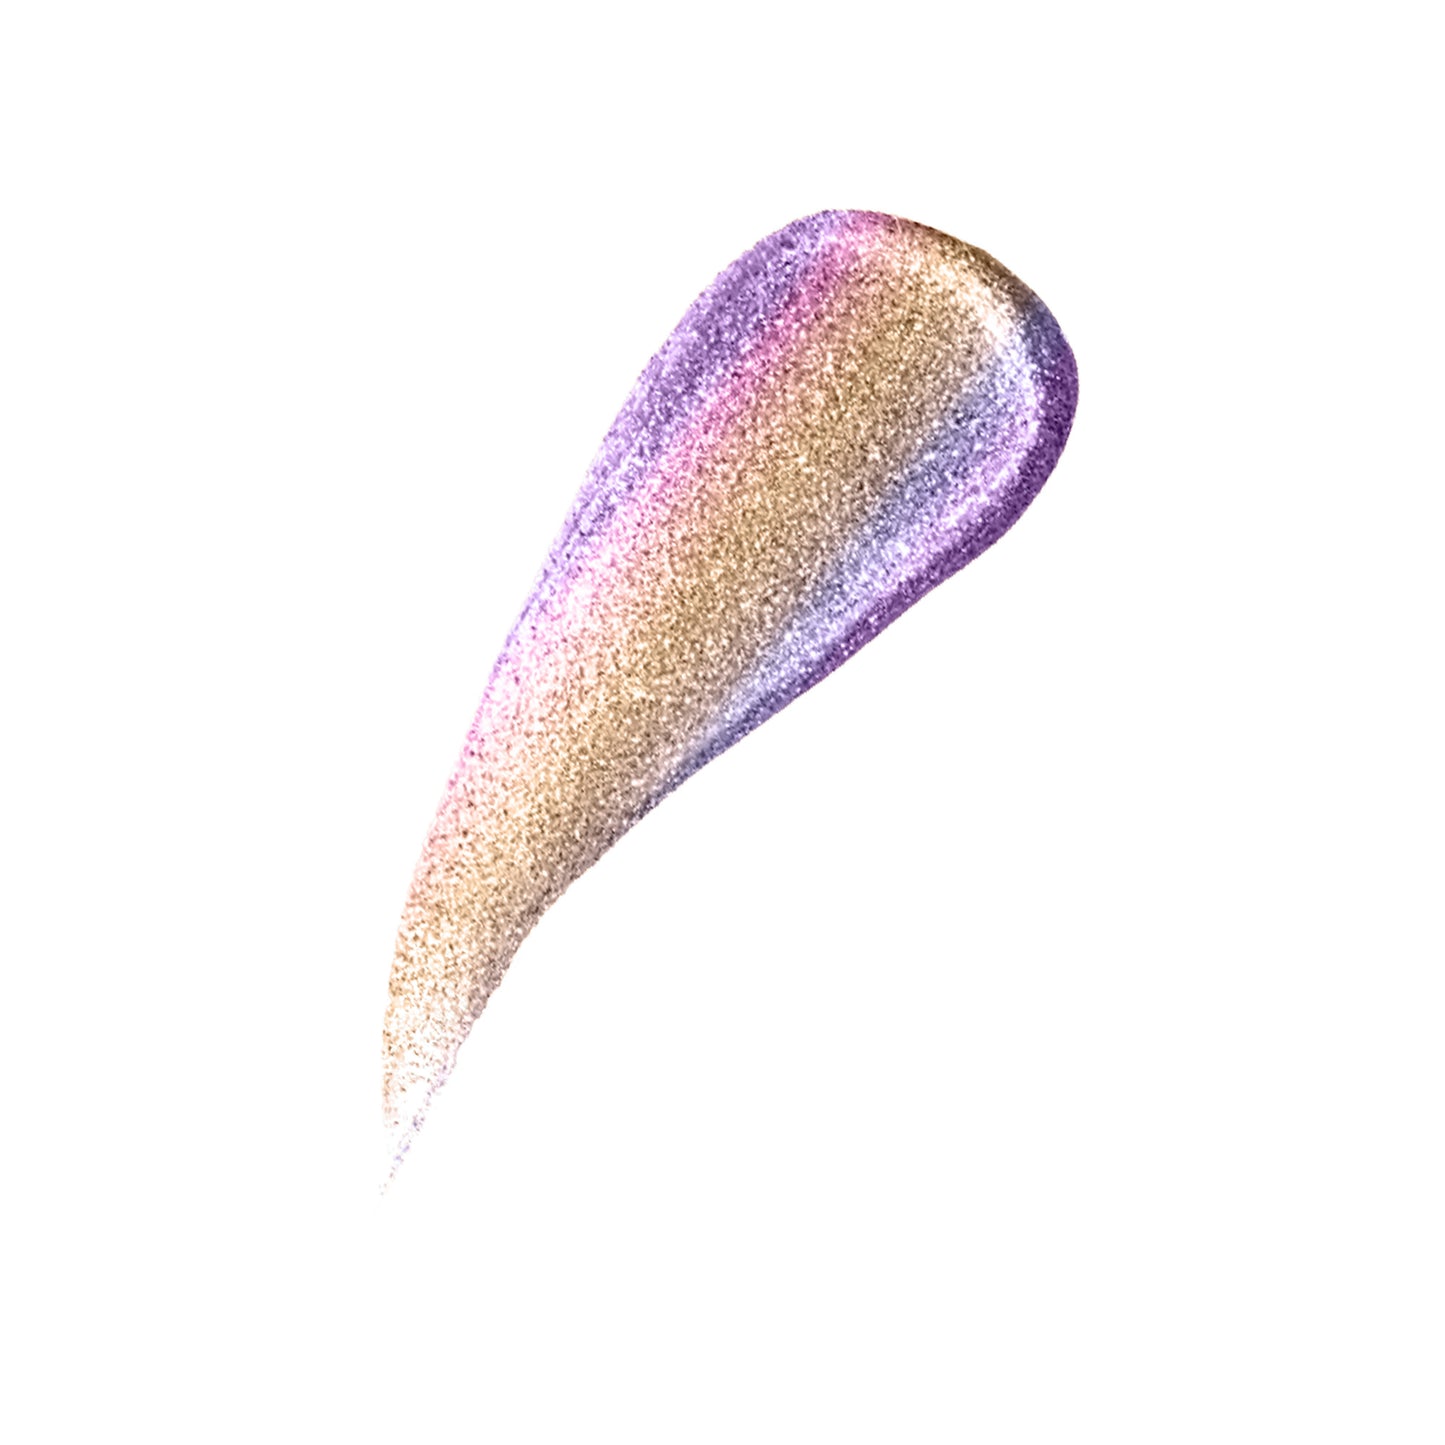 Get the high-impact shine you've always wanted with Cruisin Organics Hottie liquid shimmer. Our innovative formula provides versatile, crease-proof, and smudge-proof shine on lips, eyelids, and cheekbones. Glam up any makeup look with these shades, perfect for use alone or with other products. A must-have for extra glam and shine.